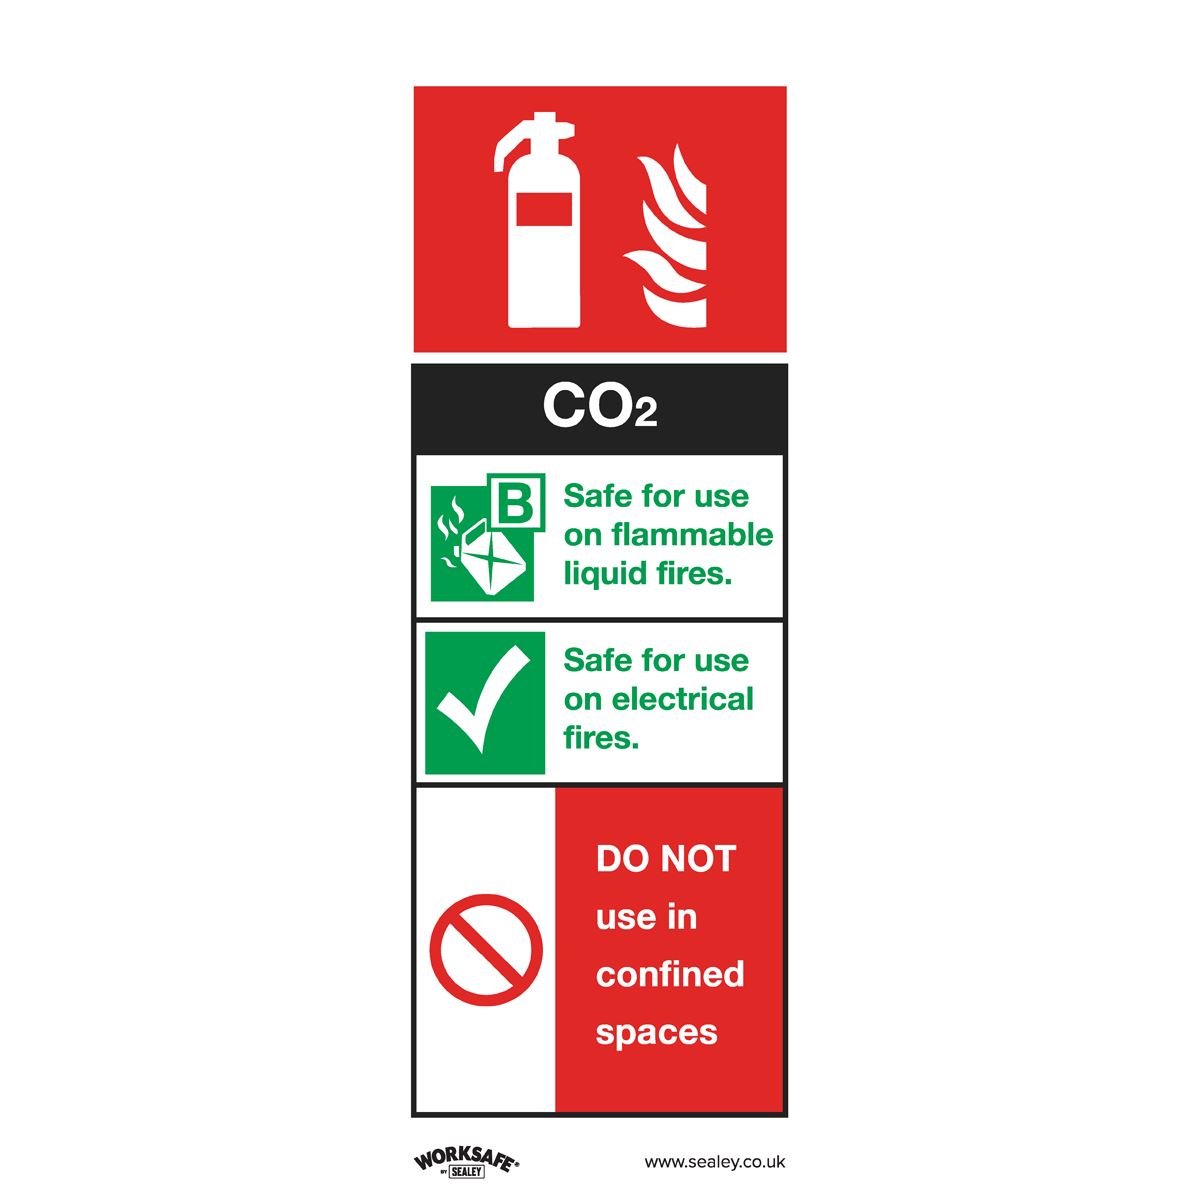 Worksafe by Sealey Safe Conditions Safety Sign - CO2 Fire Extinguisher - Self-Adhesive Vinyl - Pack of 10